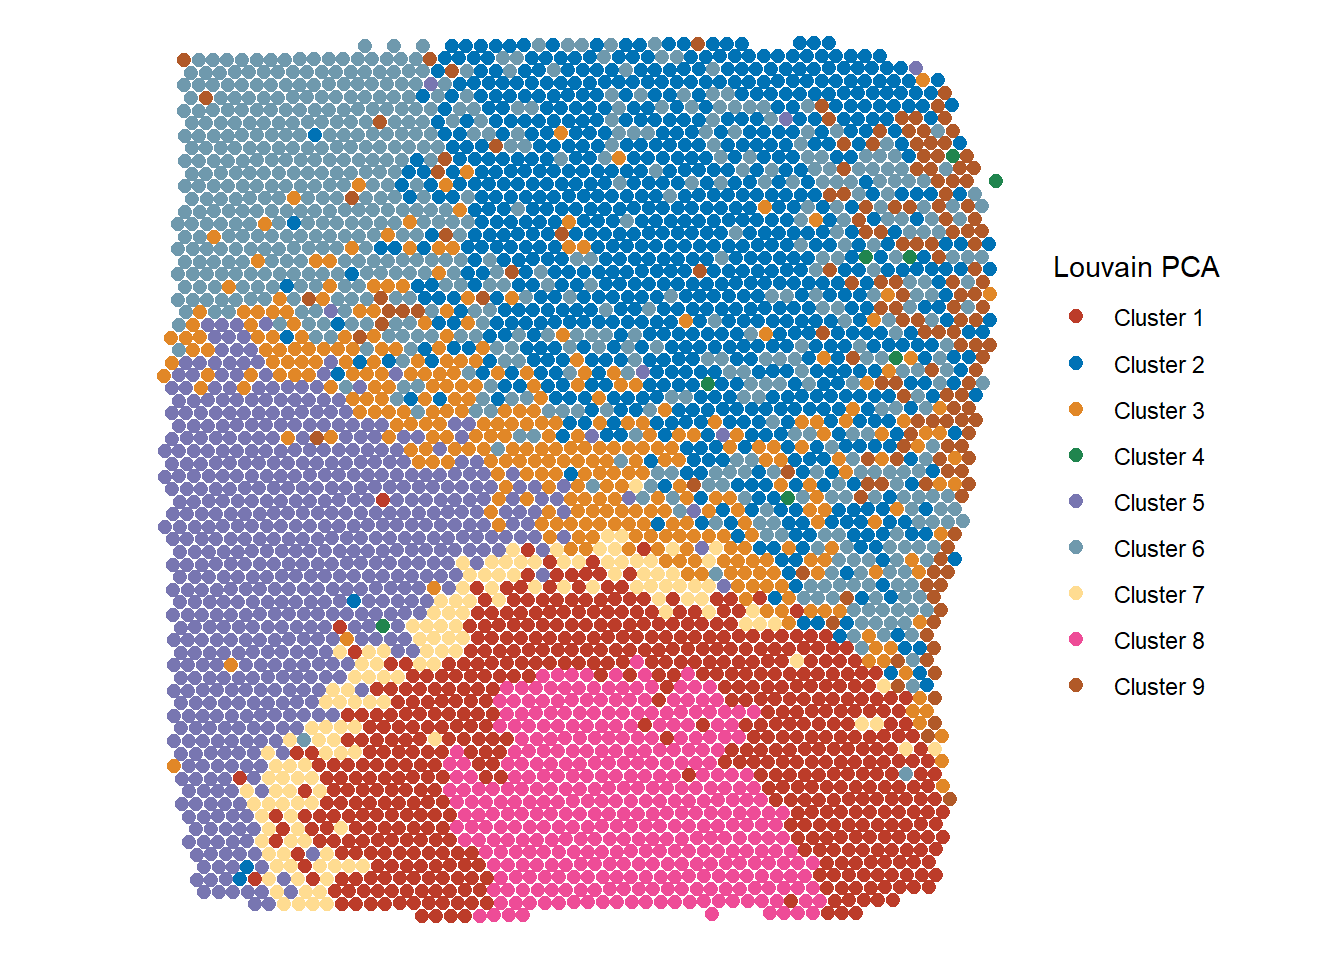 Figure 2.3 Easy visualization of different clustering results - Louvain PCA